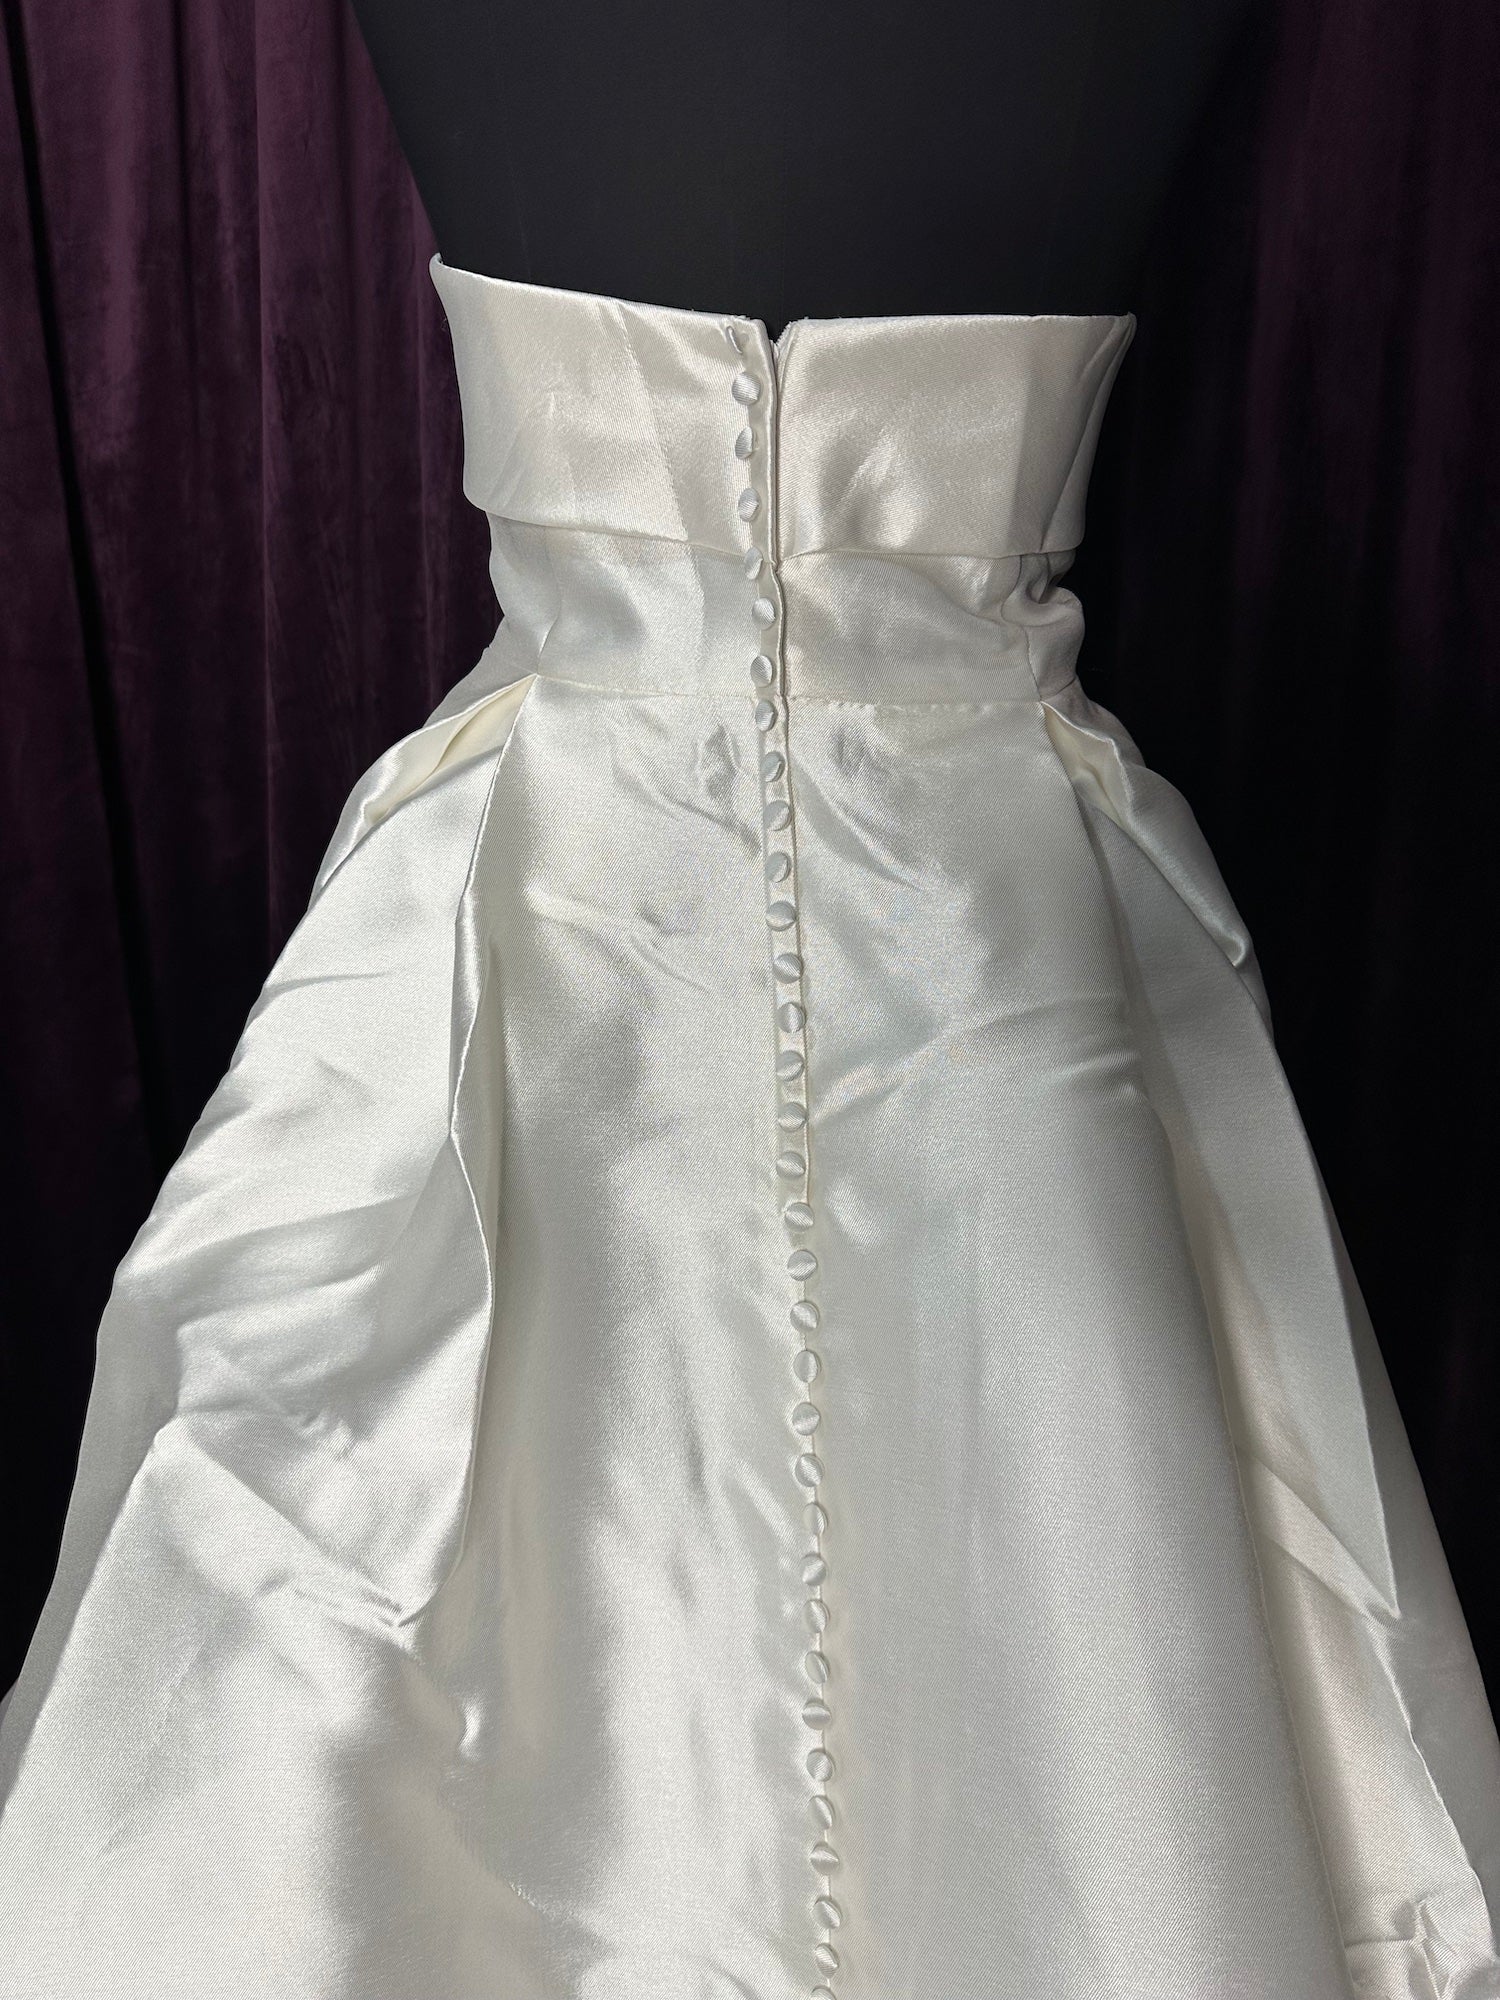 *NEW* Designer Wedding Gown Mikado Strapless Box Pleat Skirt with Buttons - #1273T